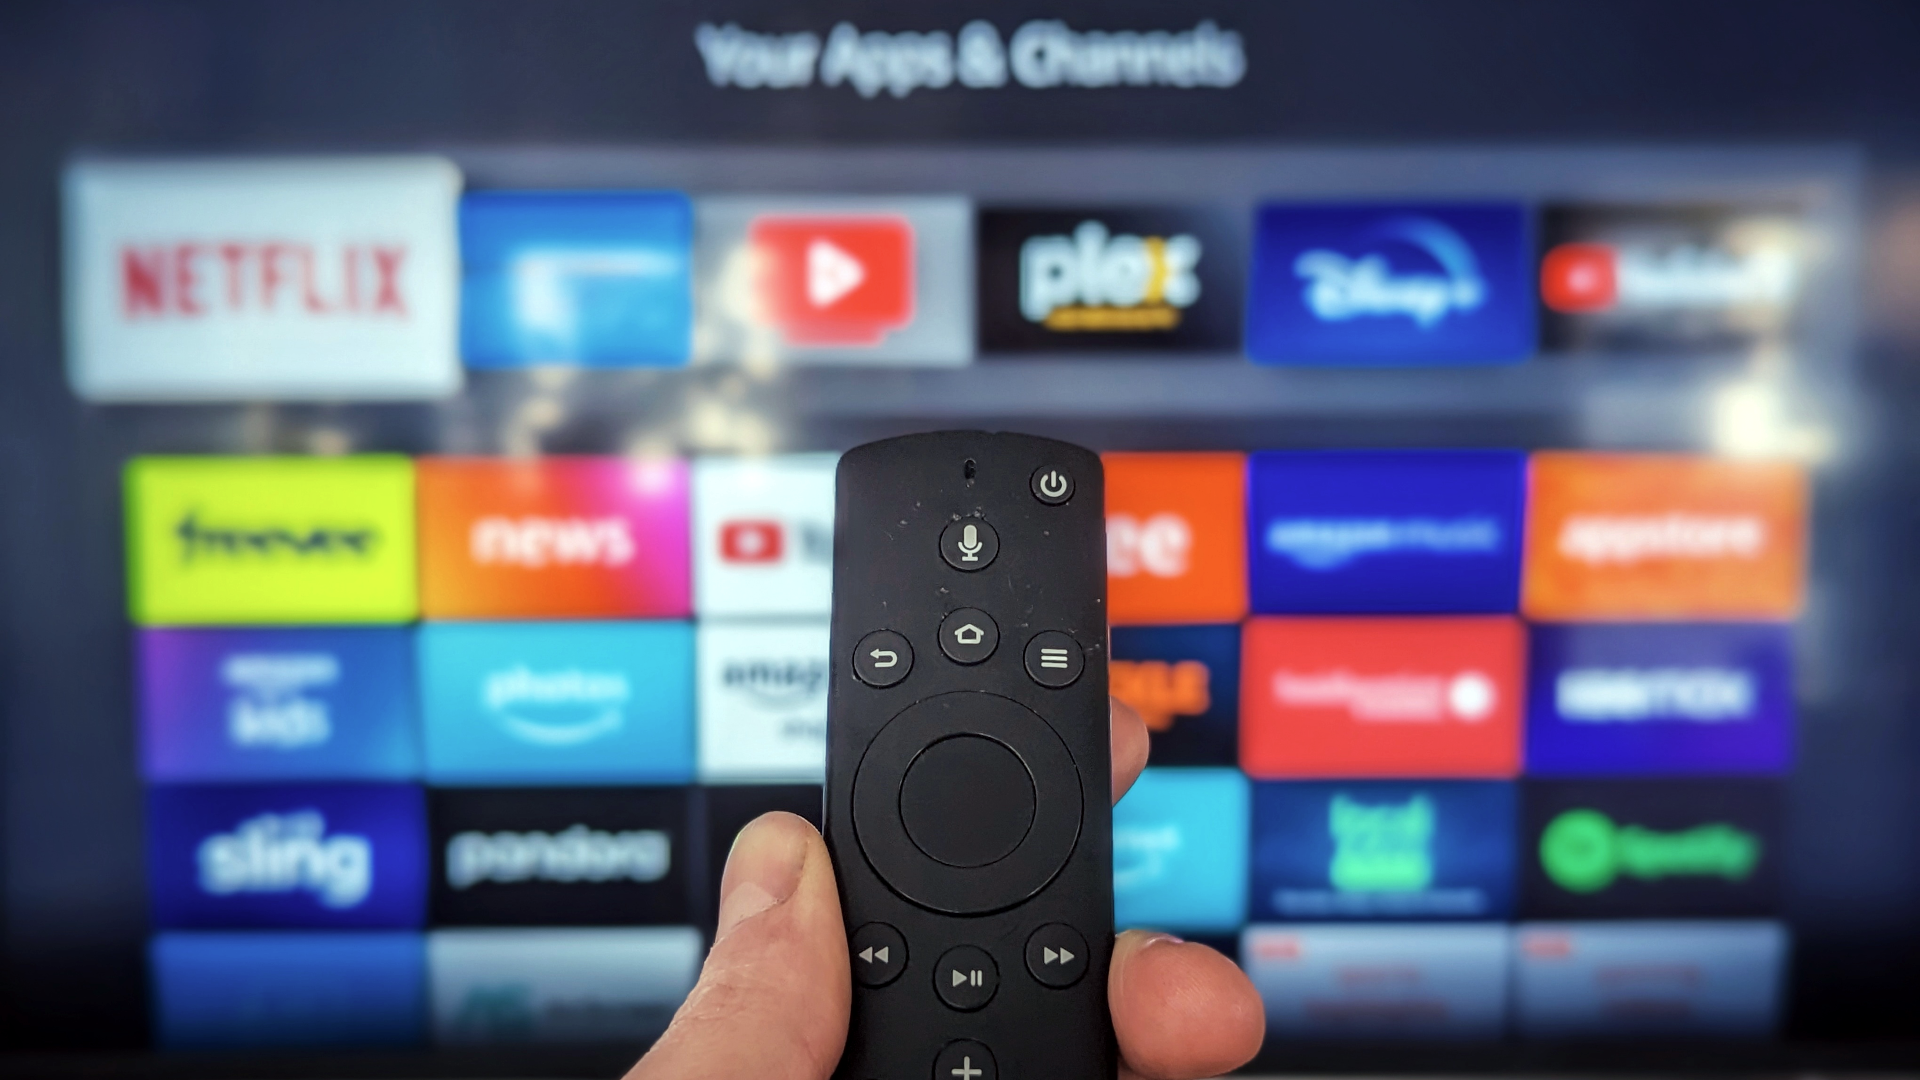 How to Sideload Apps on the Fire TV and Fire TV Stick